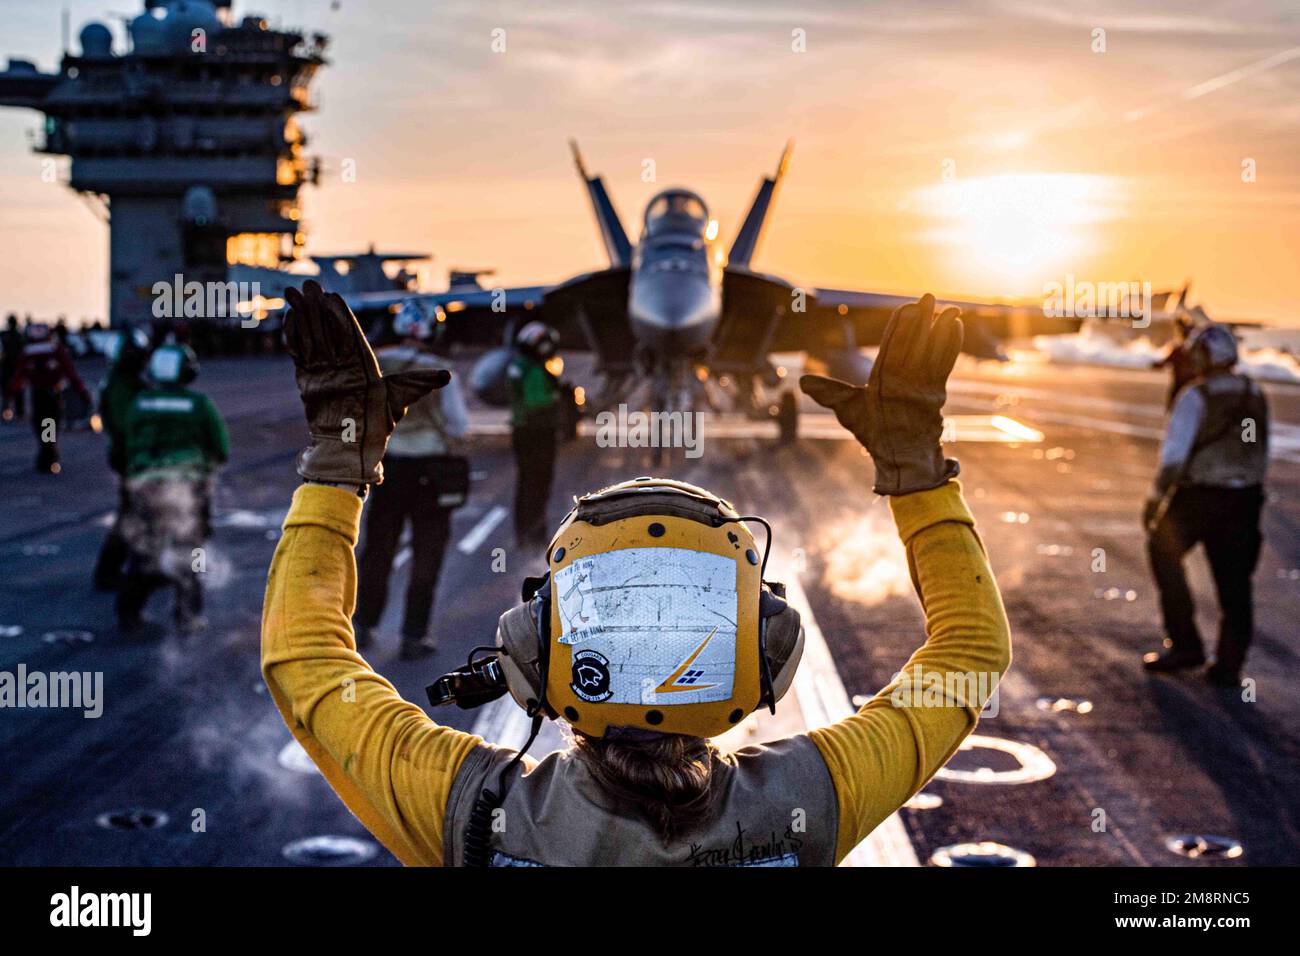 USS Nimitz, United States. 13th Jan, 2023. A U.S. Navy F/A-18E Super Hornet fighter aircraft from the Mighty Shrikes of Strike Fighter Squadron 94, is positioned for launch on the flight deck of the Nimitz-class aircraft carrier USS Nimitz at sunset underway conducting routine operations, January 13, 2023 in the South China Sea. Credit: MC2 David Rowe/U.S Navy Photo/Alamy Live News Stock Photo